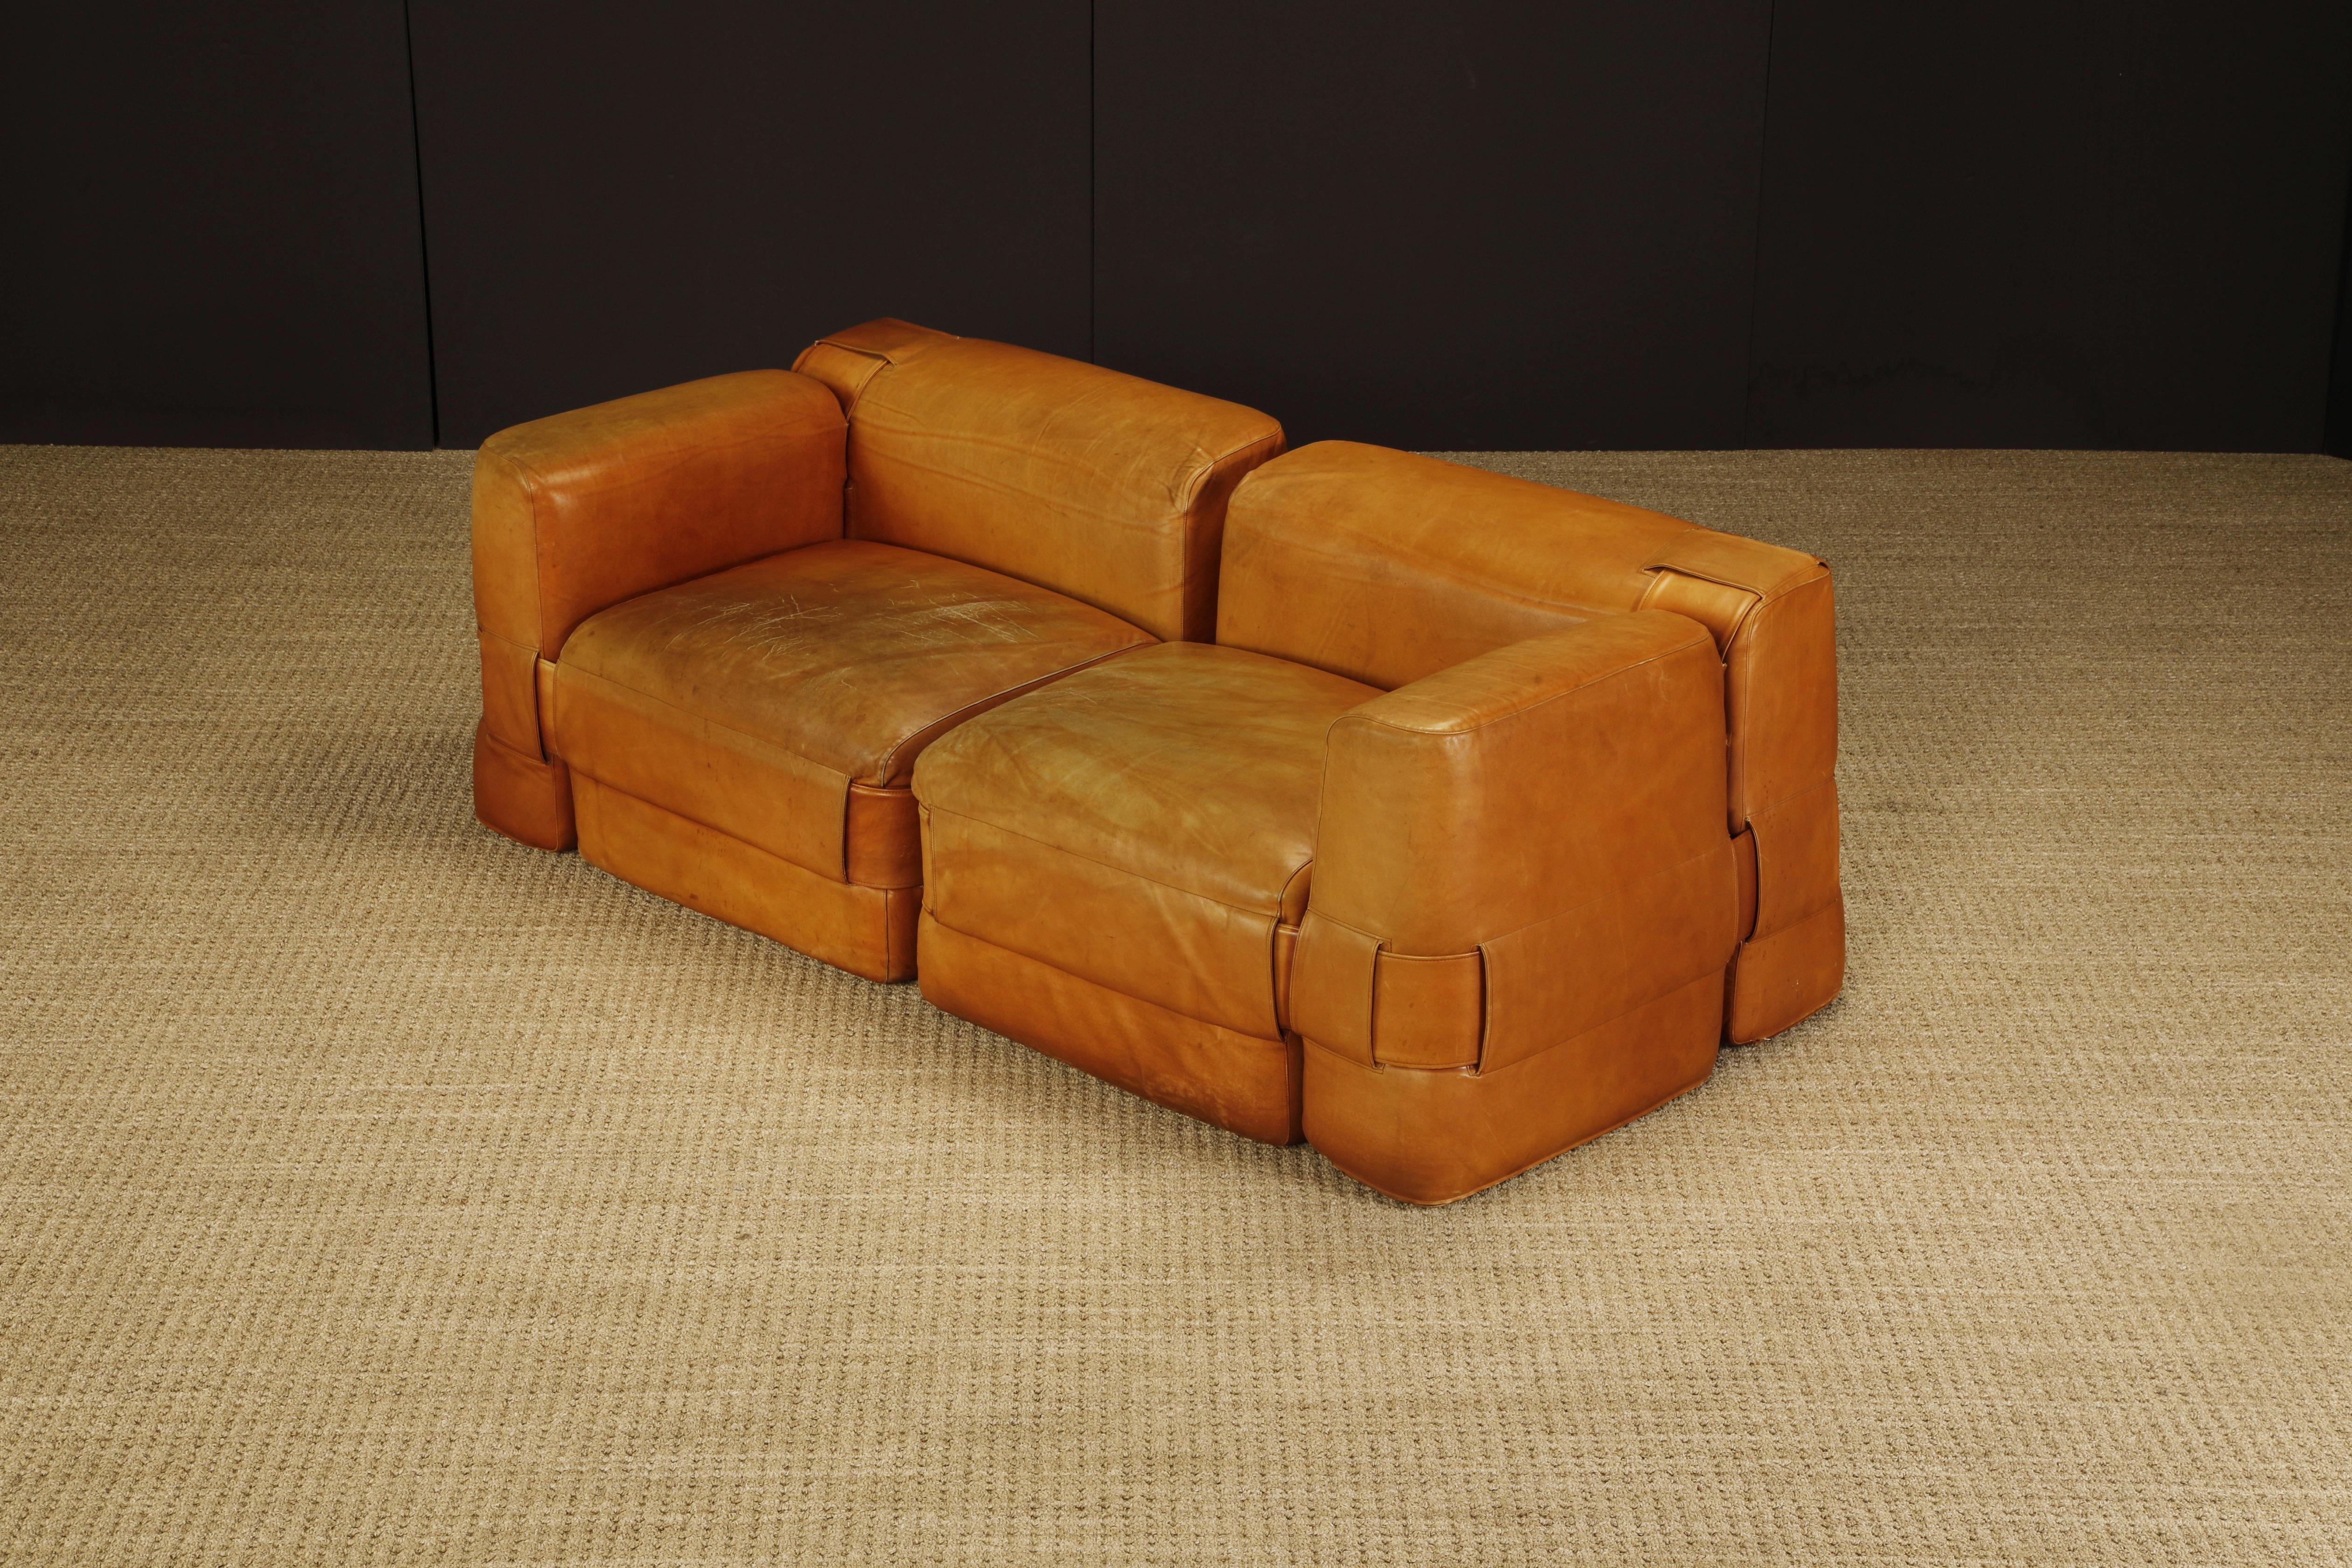 Original 932-Quartet Leather Sectional Sofa by Mario Bellini for Cassina, 1964 For Sale 7